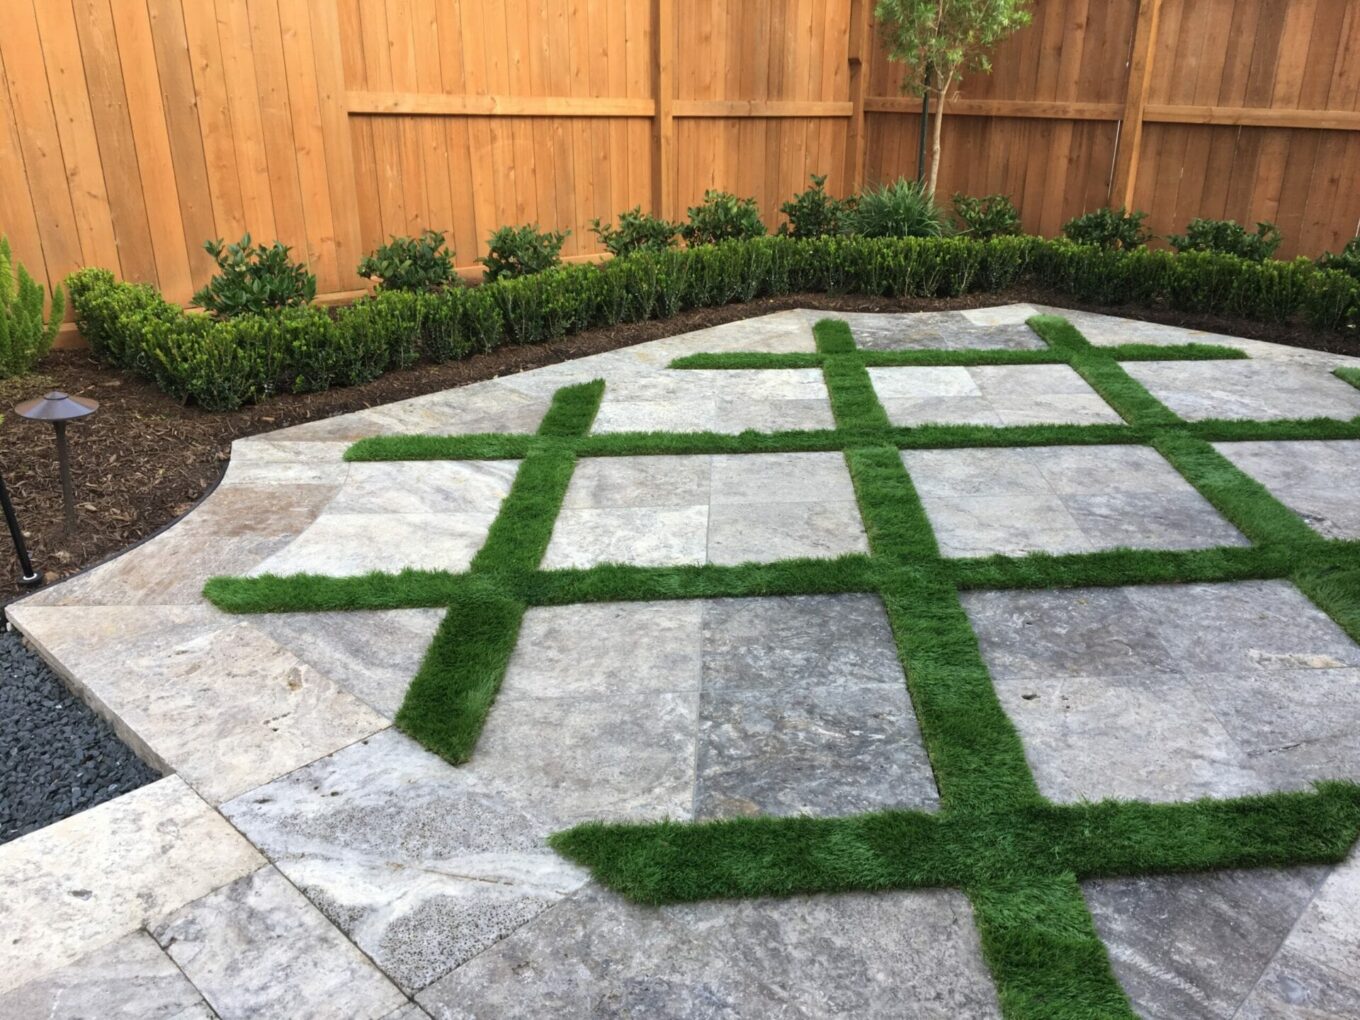 A patio with grass on the ground and concrete